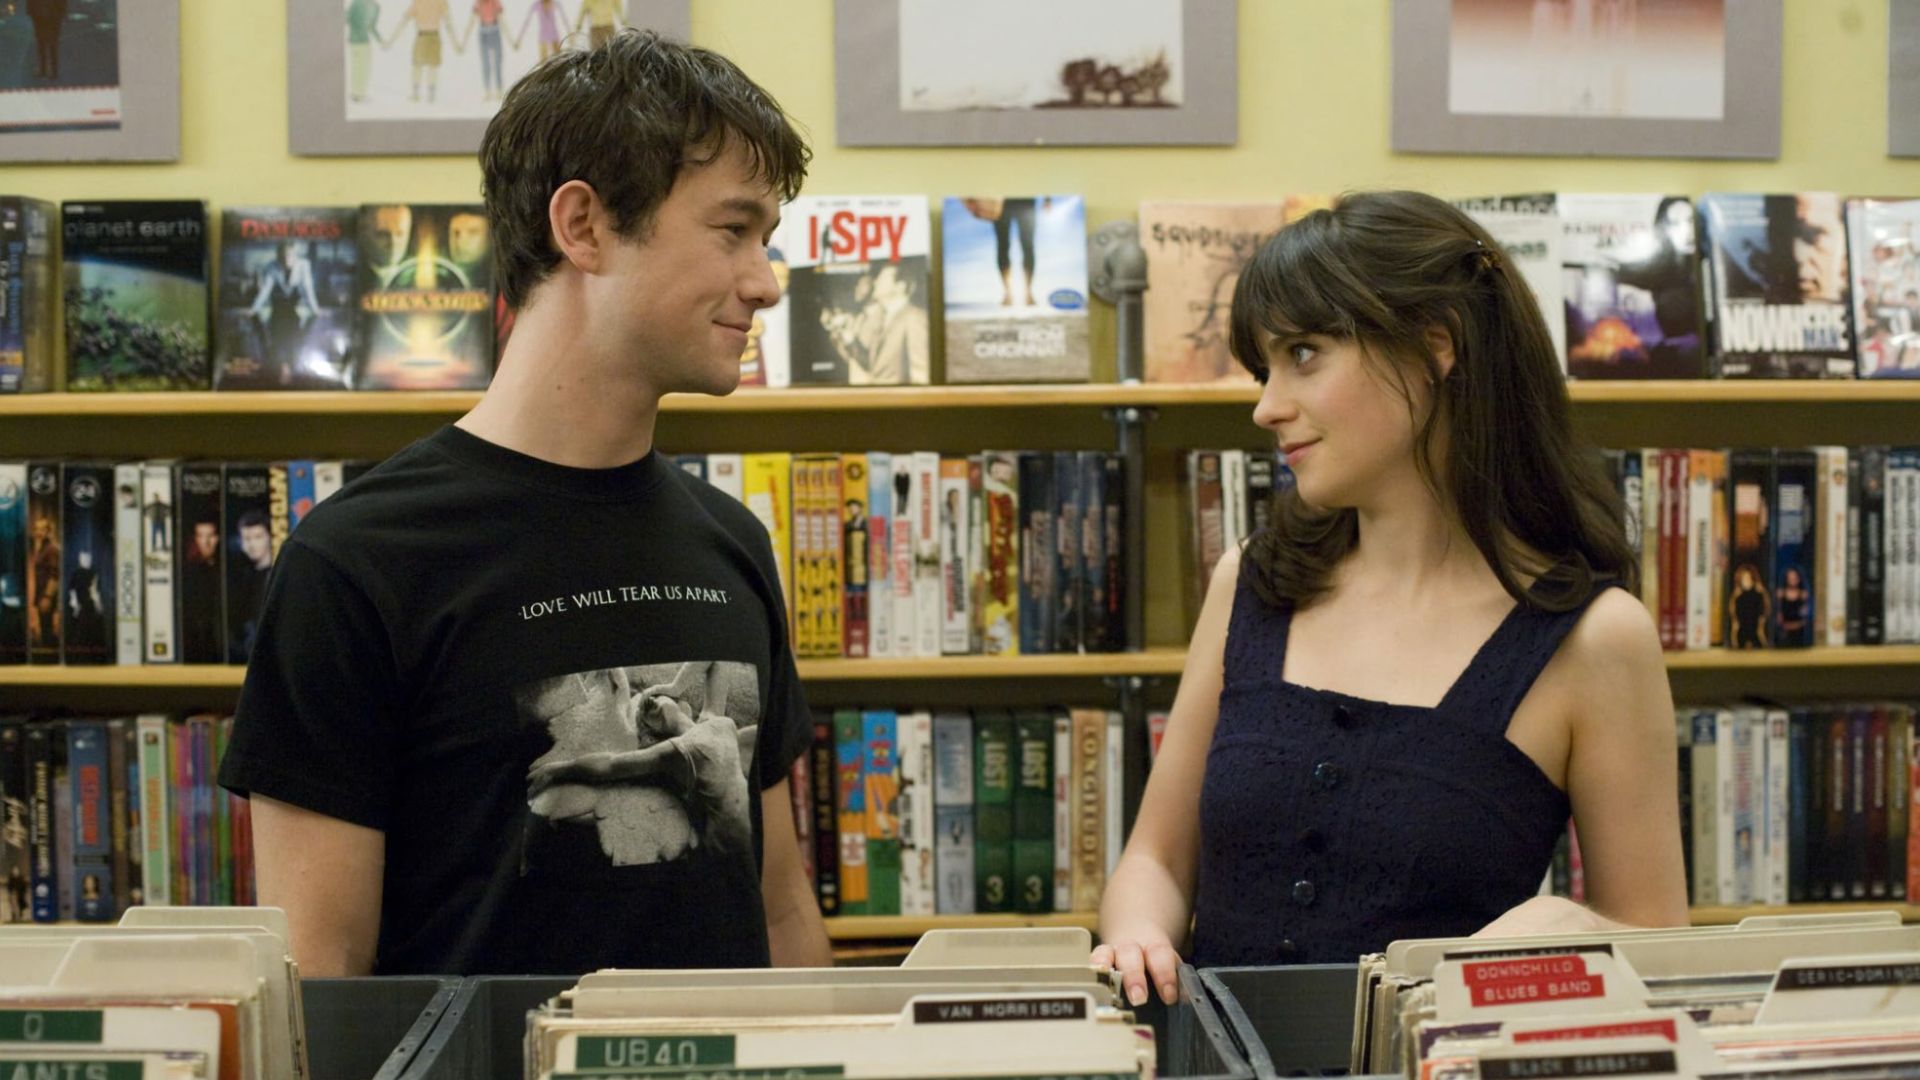 Should We Leave Behind the Manic Pixie Dream Girl Trope?